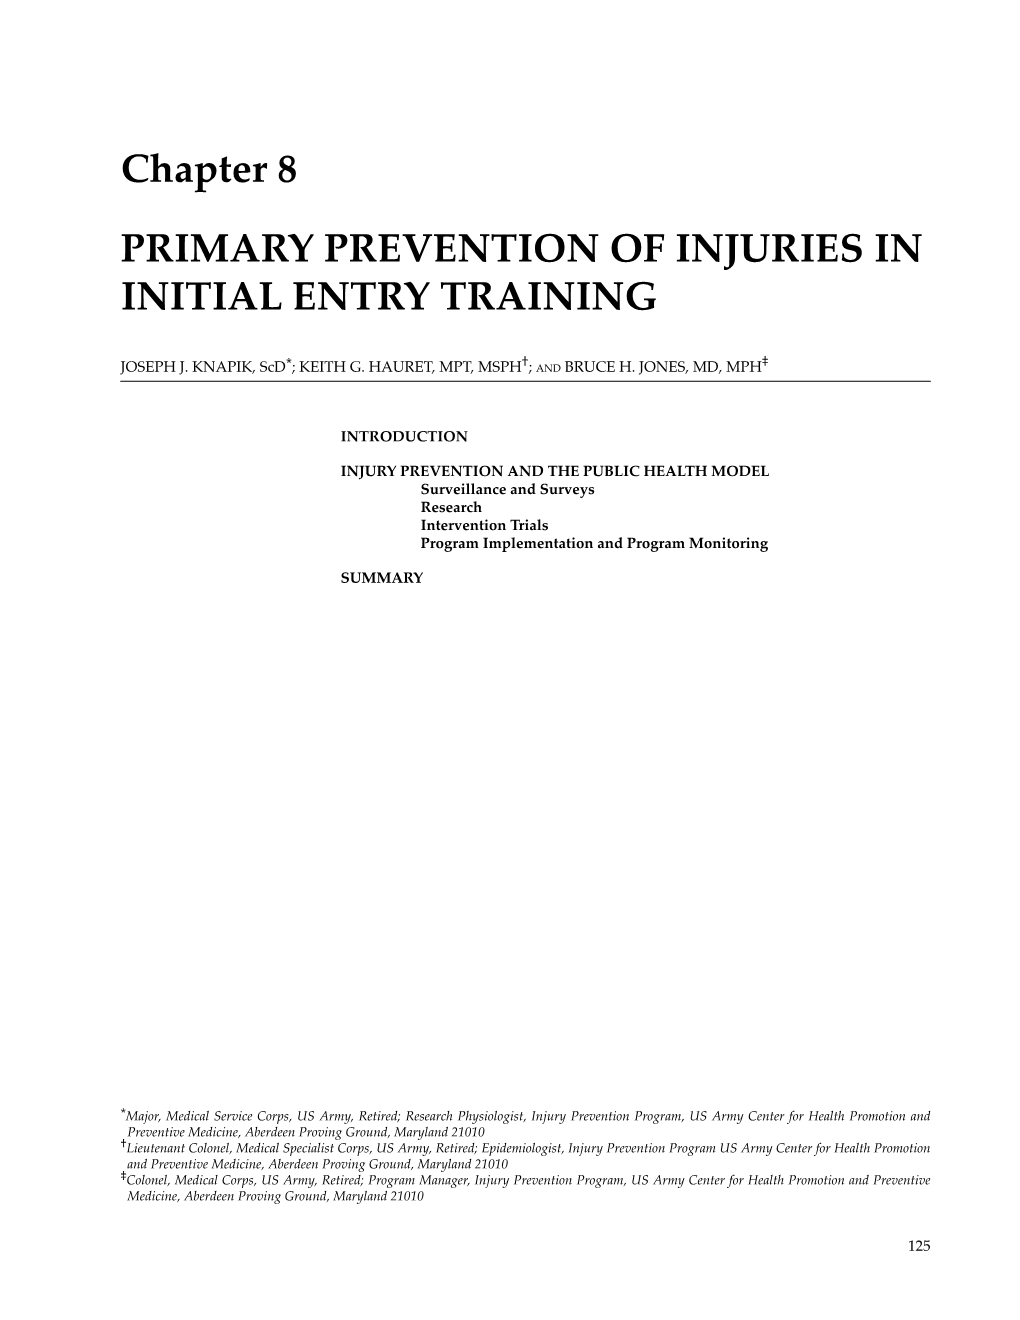 Chapter 8 Primary Prevention of Injuries in Initial Entry Training